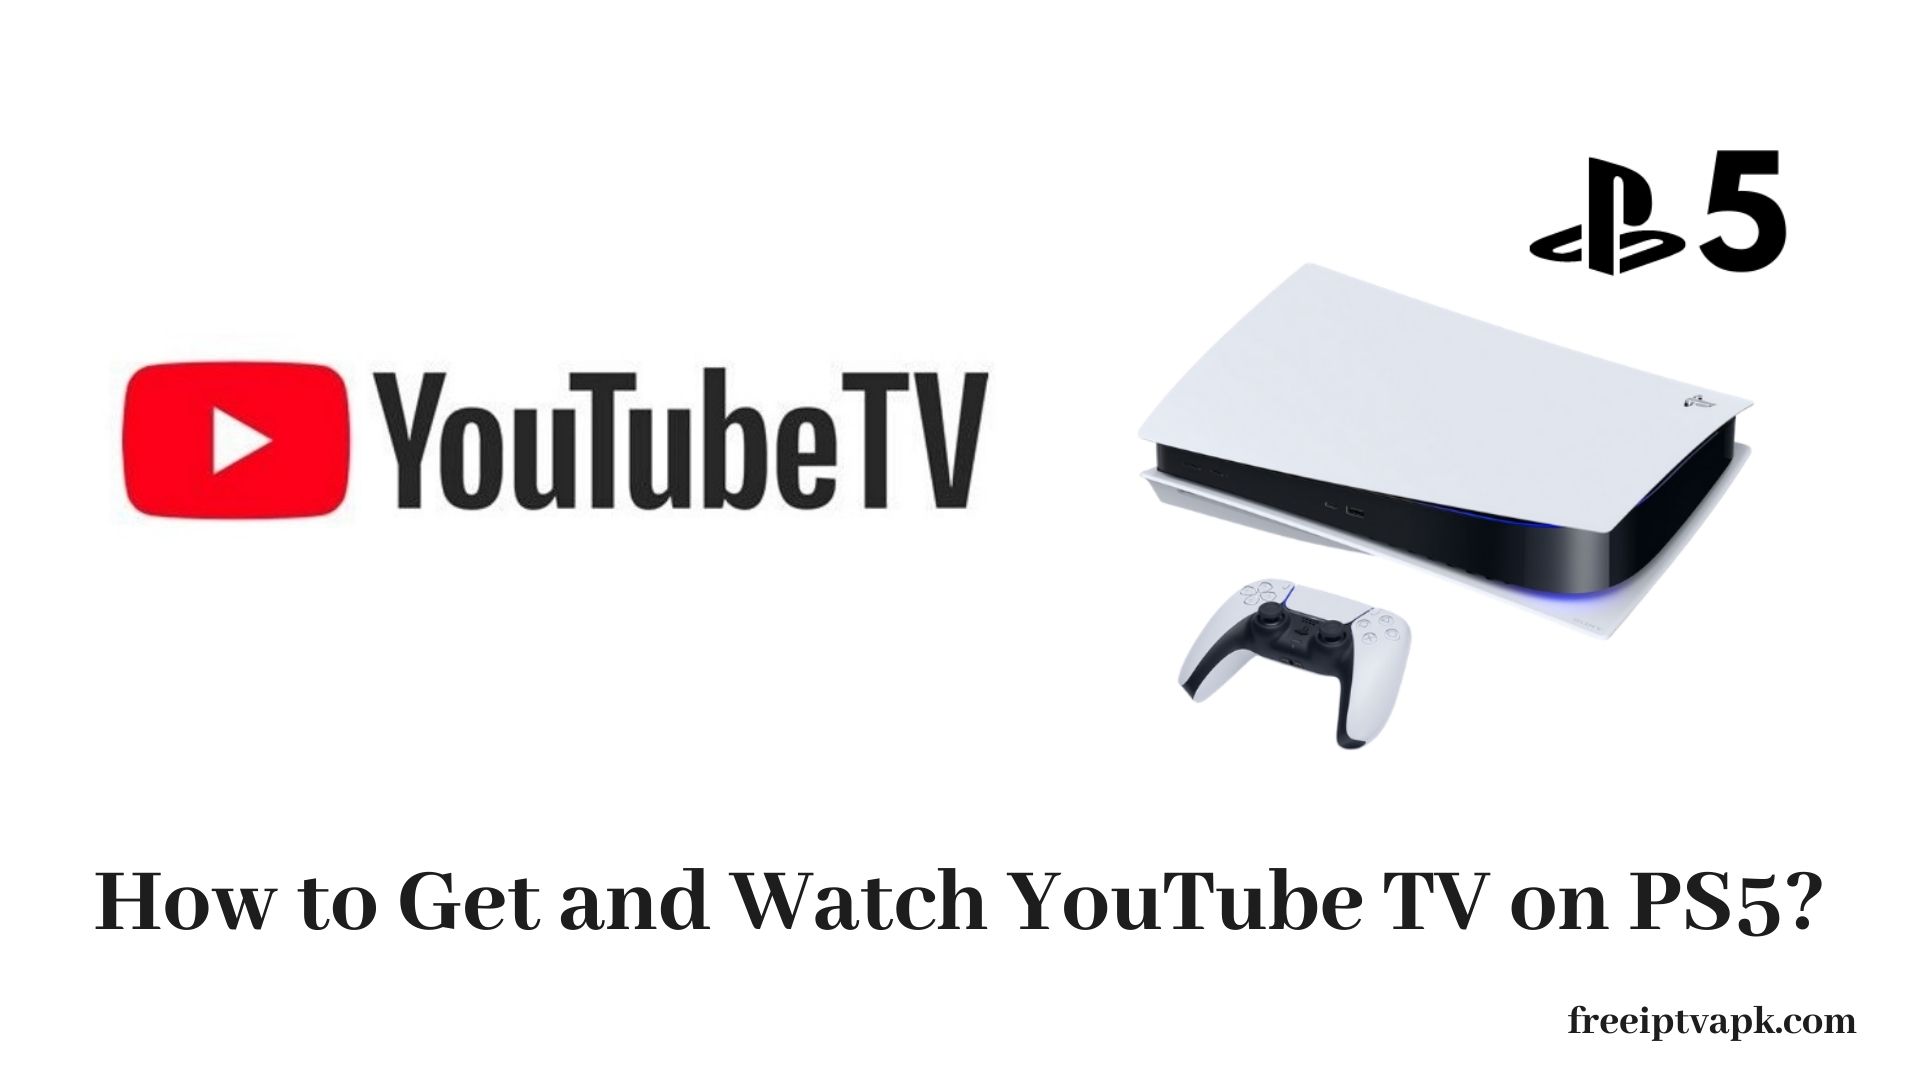 YouTube TV on PS5